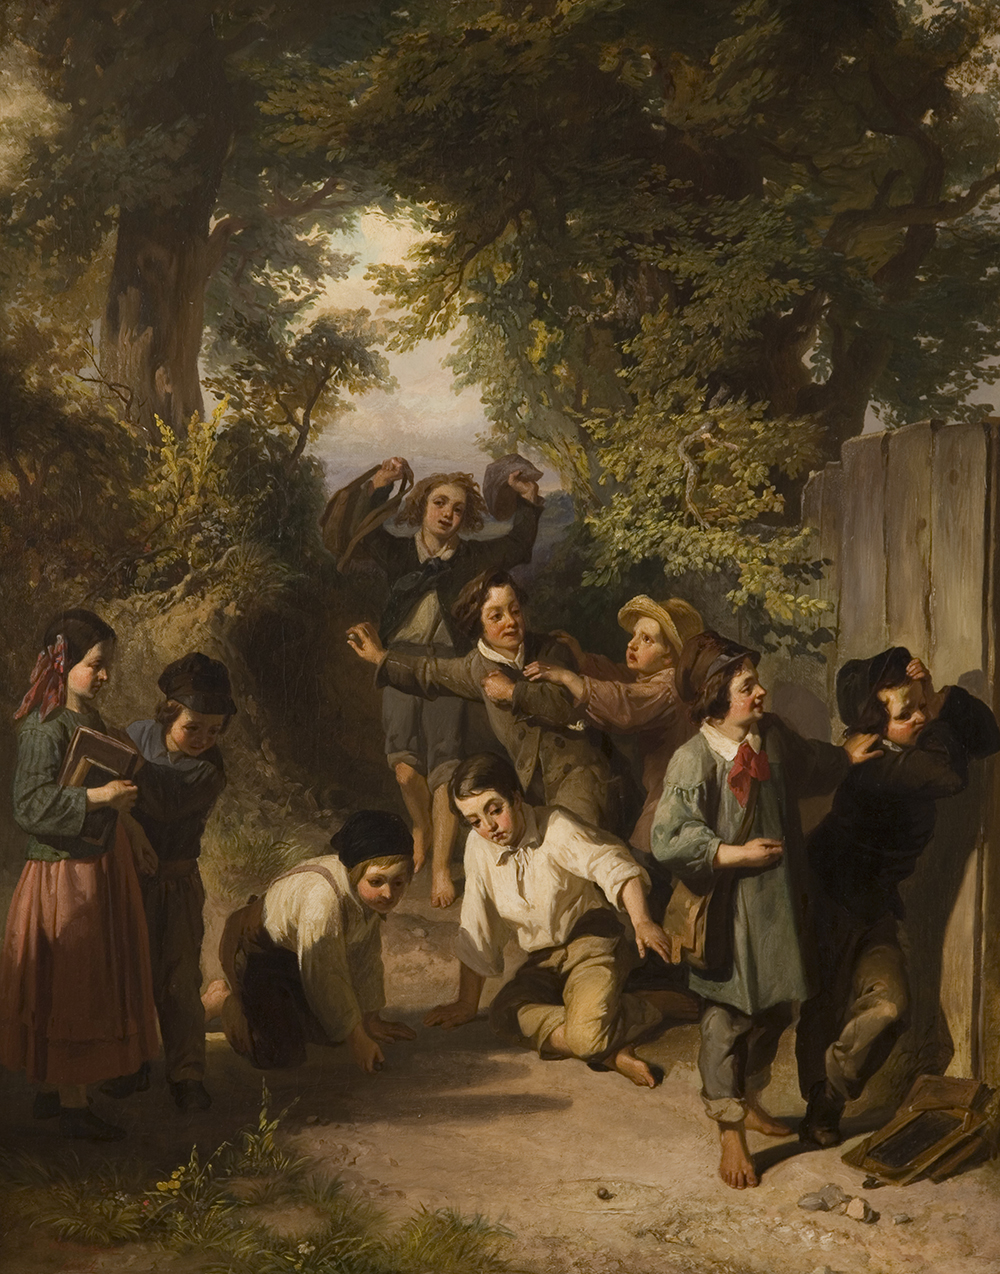 A group of schoolchildren are on a wooded path with a wood fence on one side. Several boys are playing marbles in the center of the path. Two boys are fighting behind the players. A girl and boy are observing the game while two boys are facing away leaning on the fence.